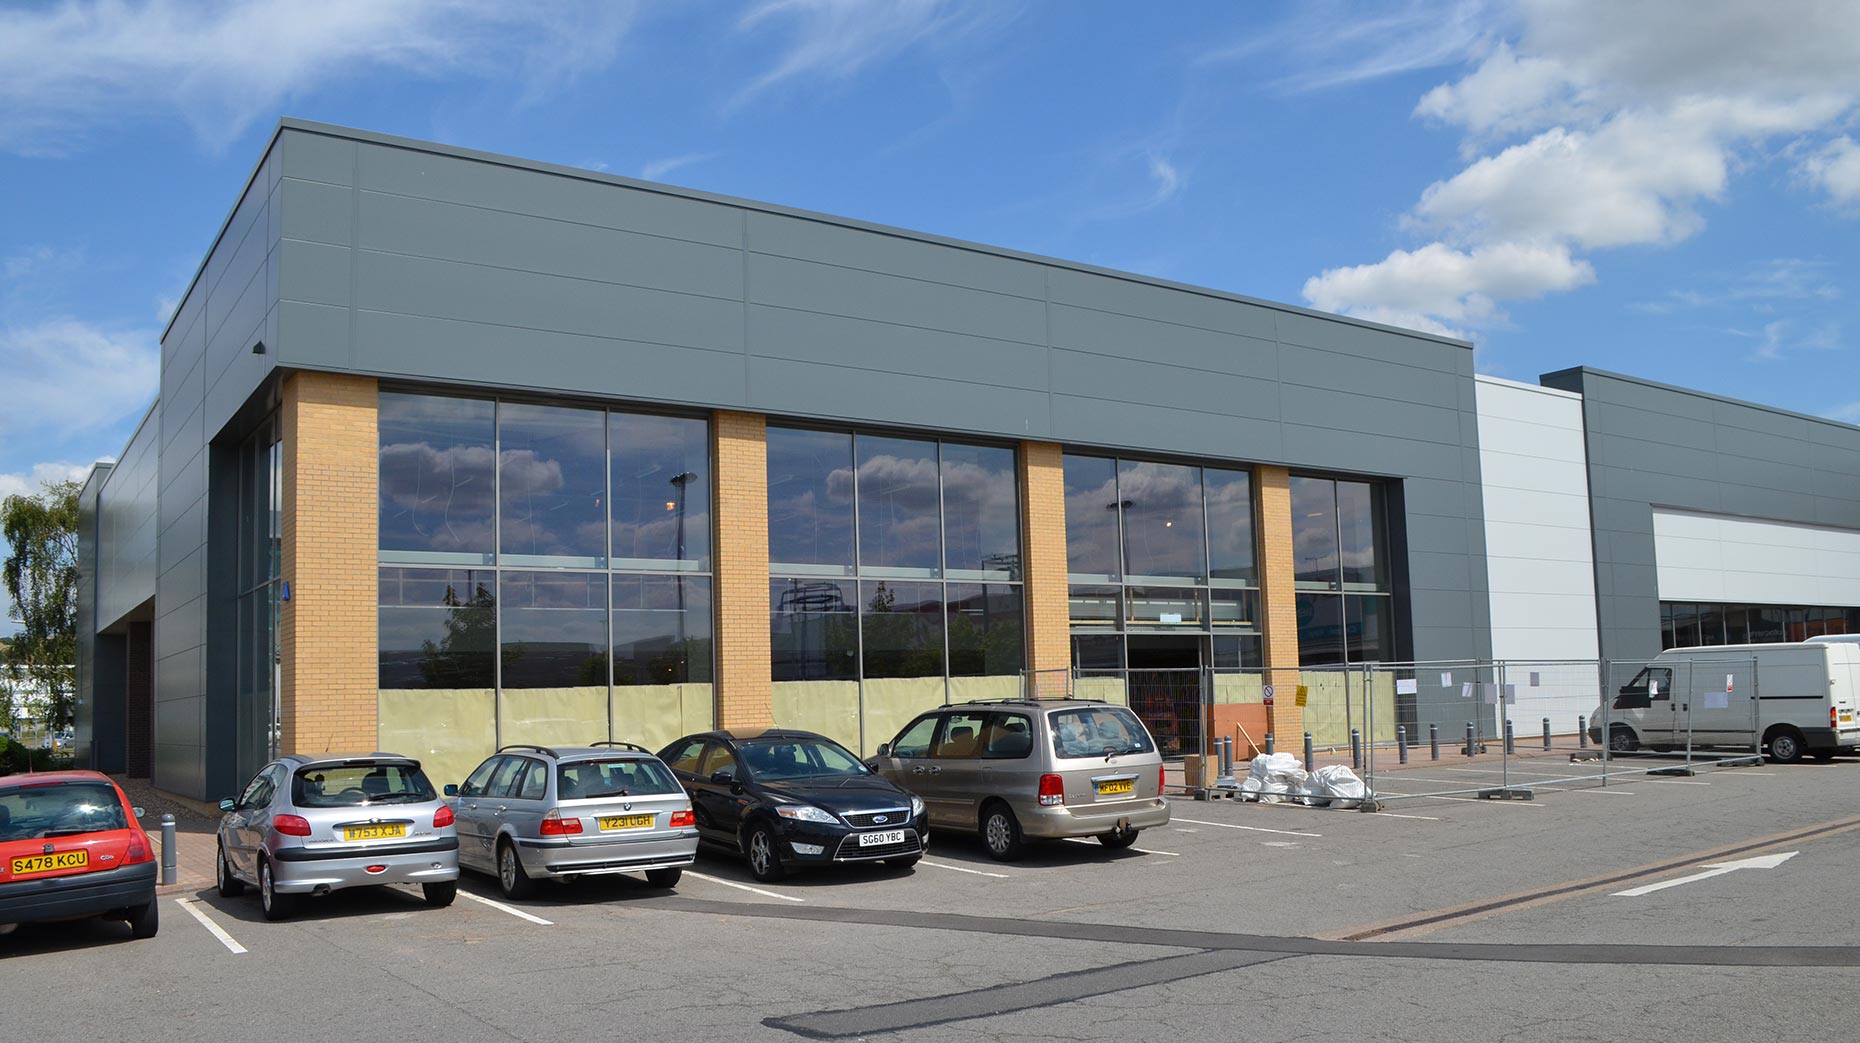 The new HomeSense store will be located in part of the former Comet unit off Tritton Road, Lincoln. Photo: The Lincolnite